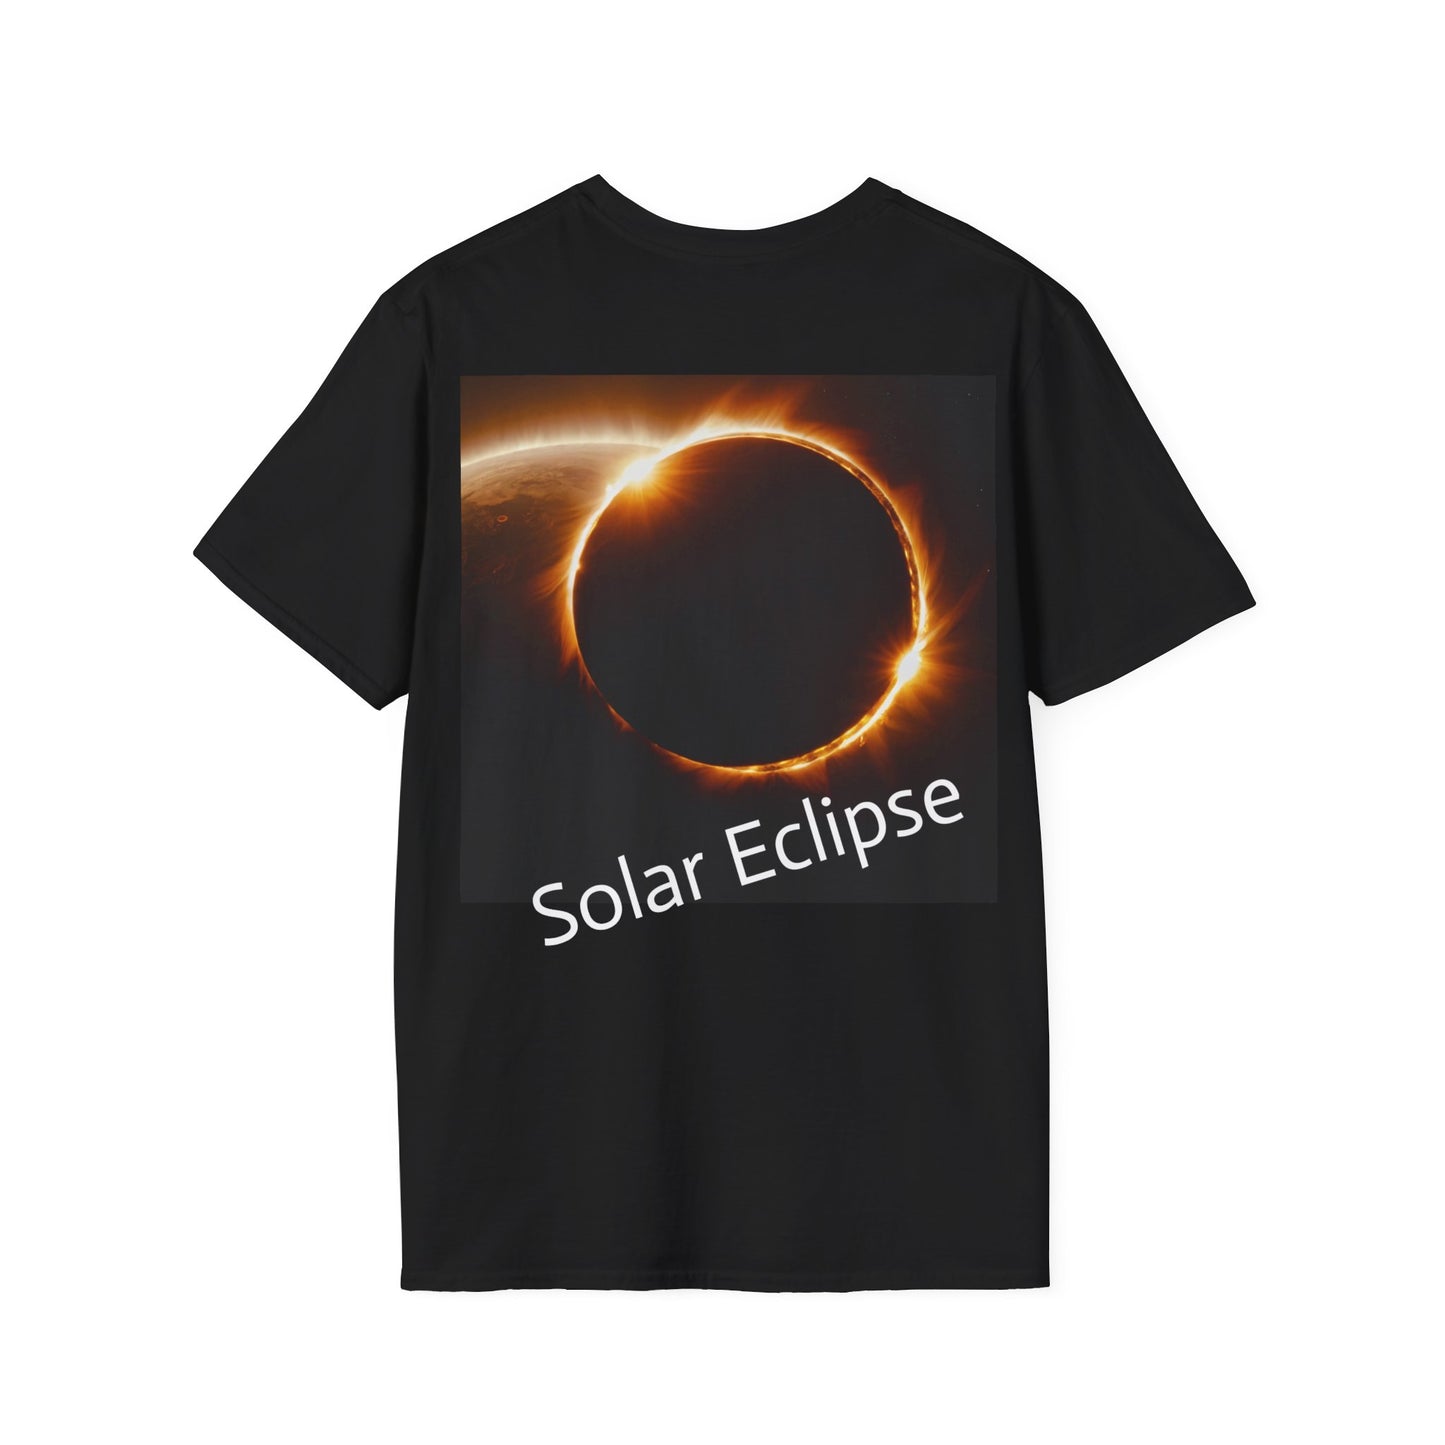 Solar Eclipse Softstyle Tee: Comfort is the New Fashion  $29.99